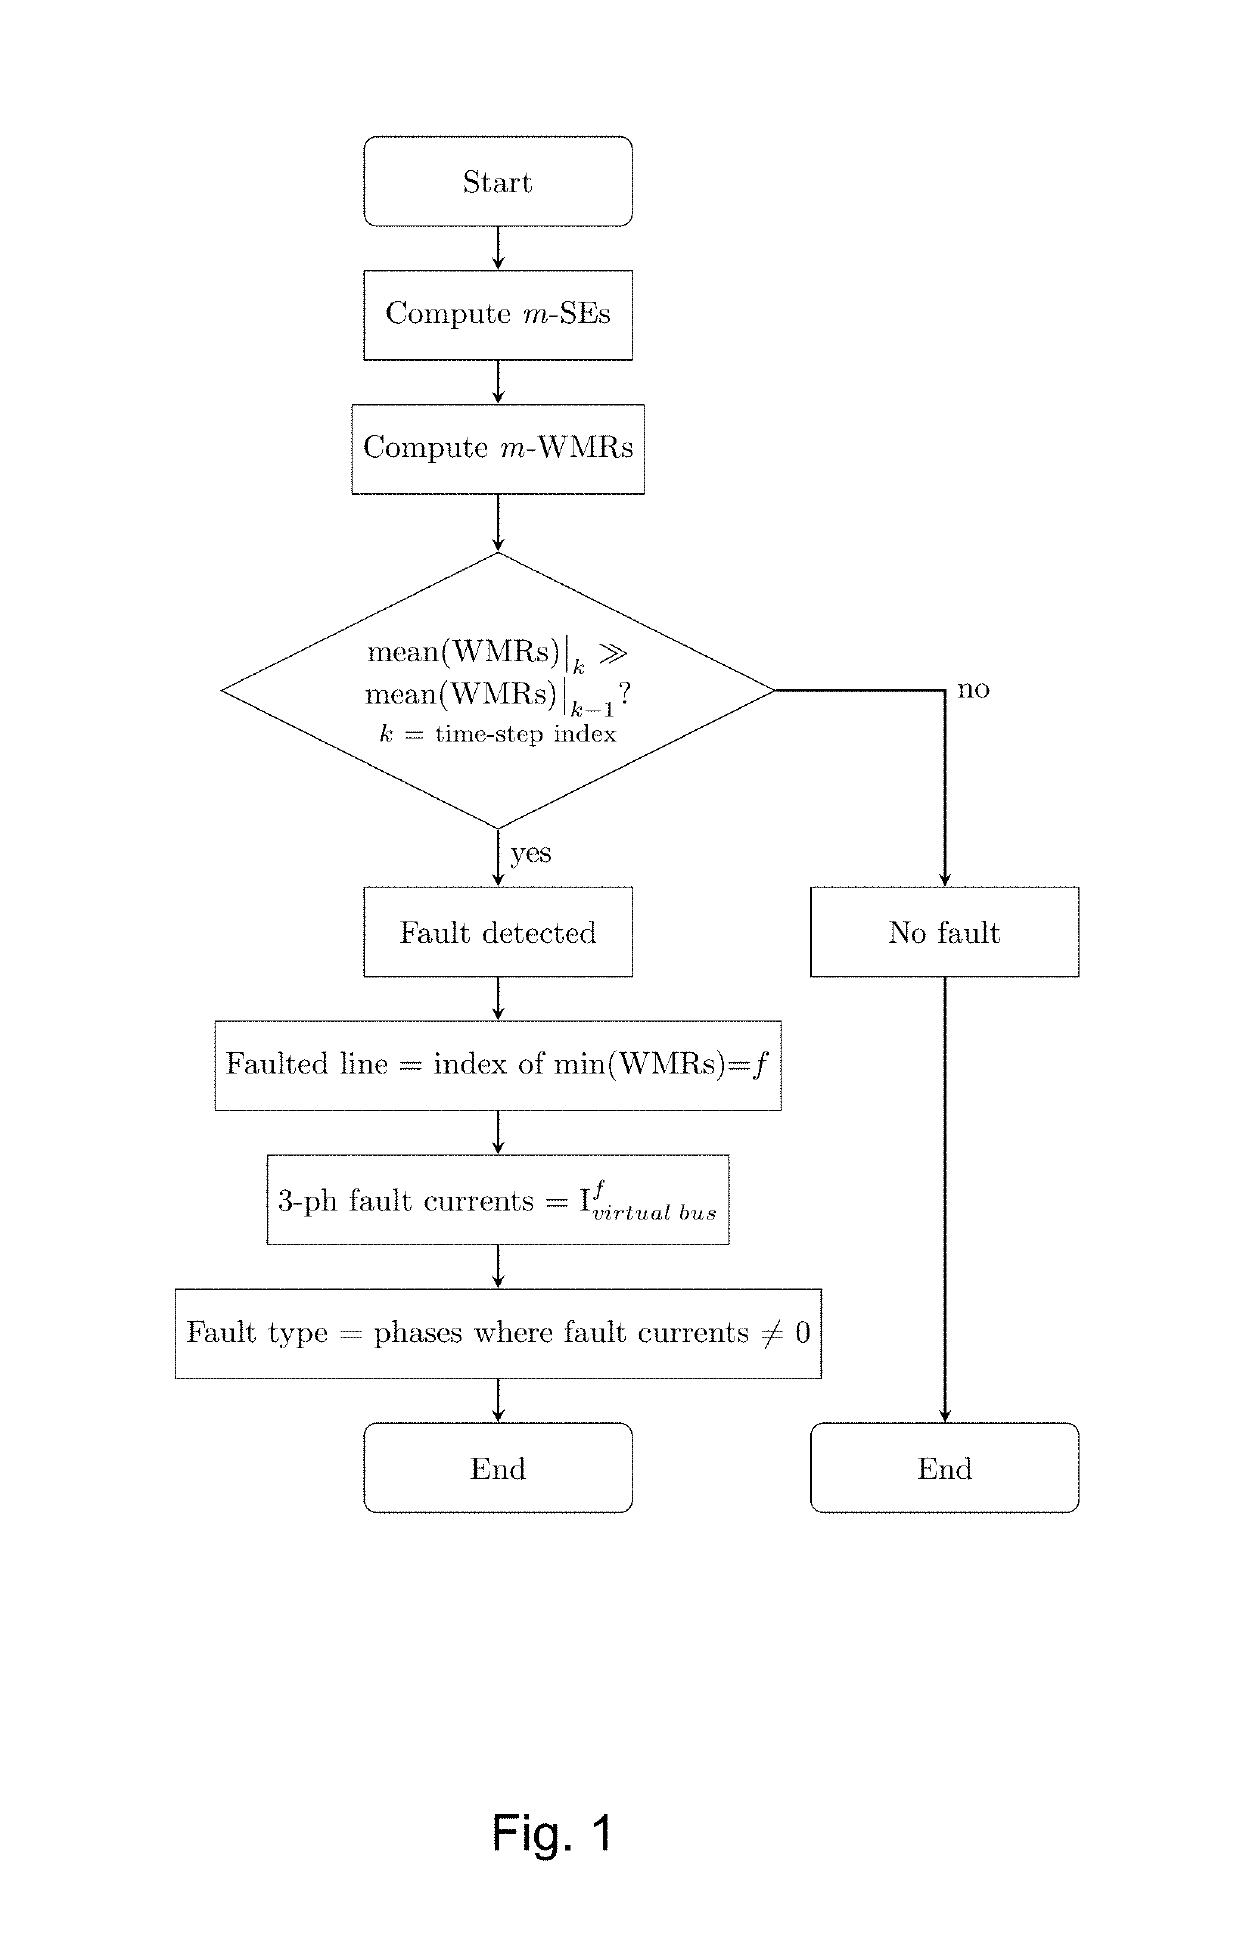 Method and system for fault detection and faulted line identification in power systems using synchrophasors-based real-time state estimation